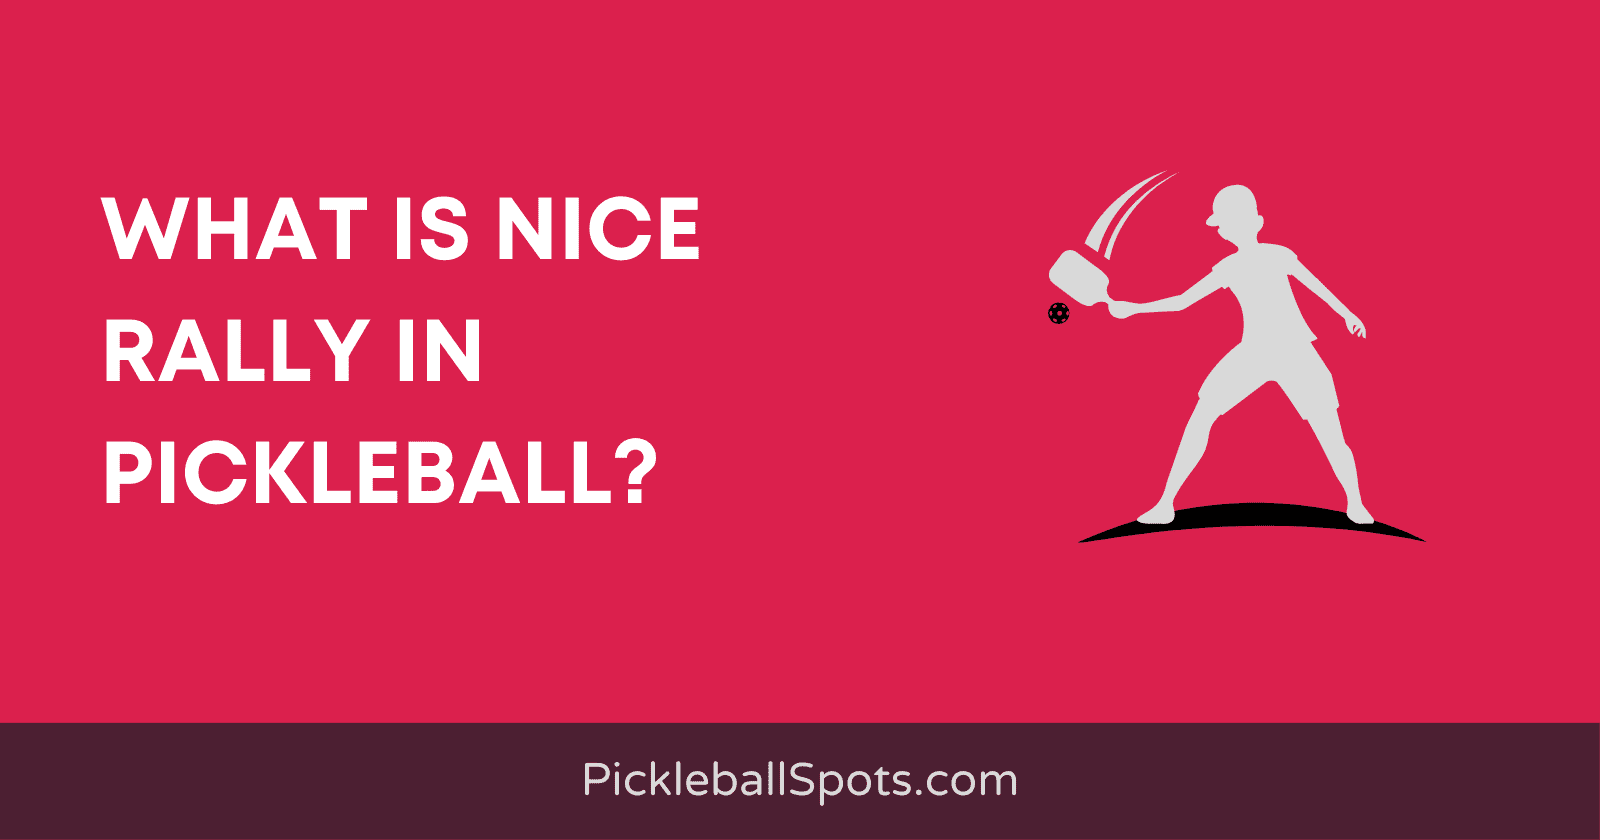 What Is Nice Rally In Pickleball